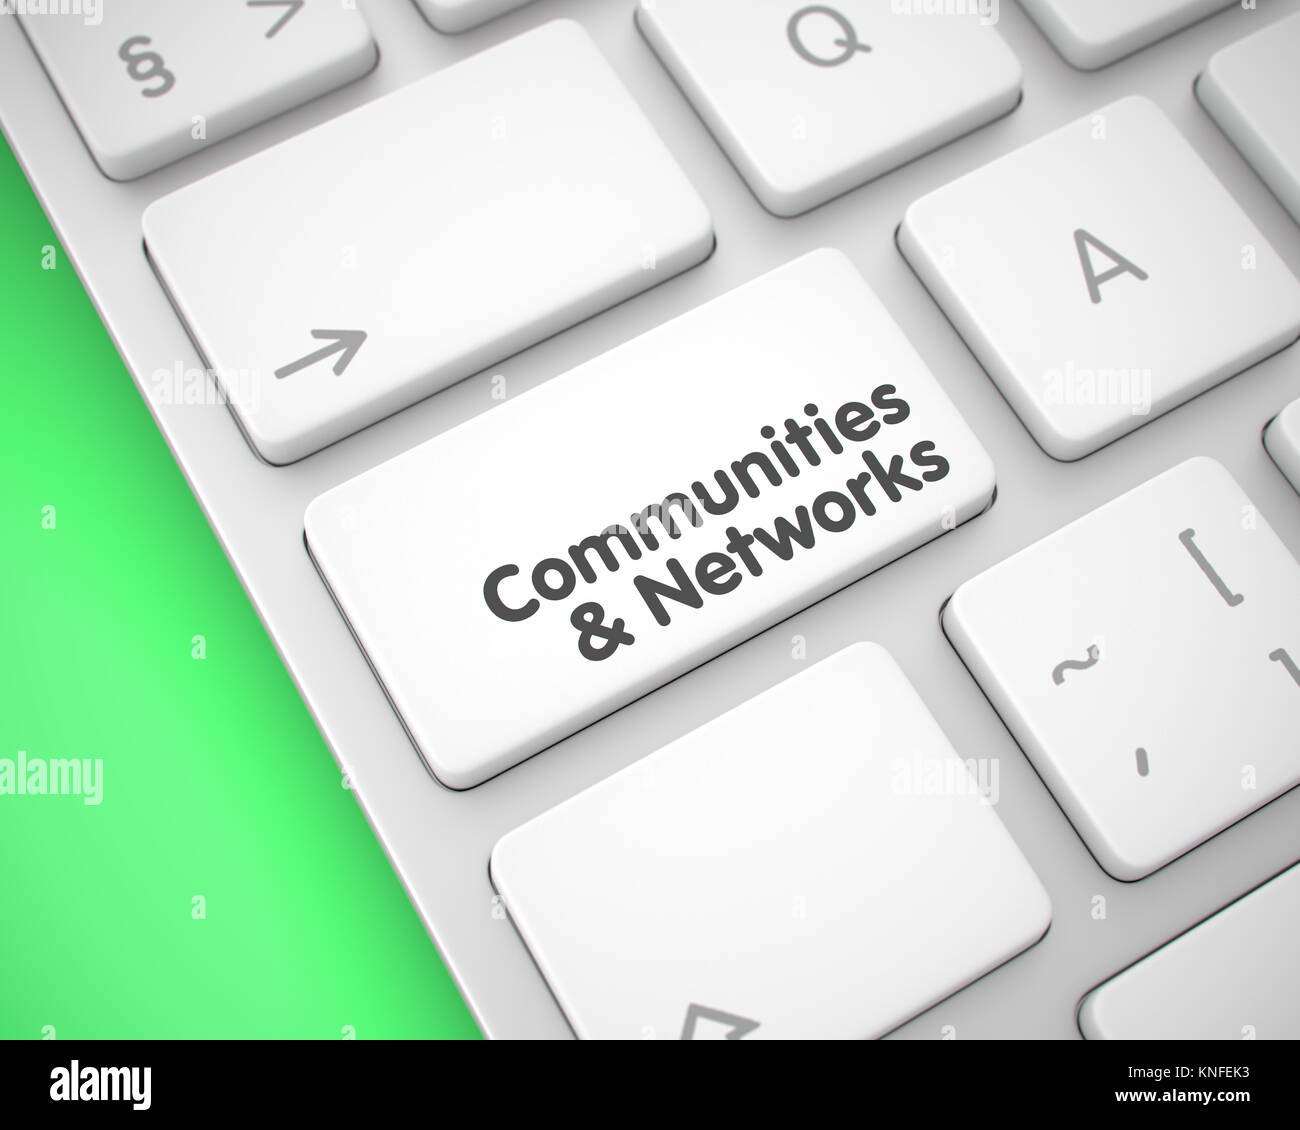 Communities And Networks on White Keyboard Button. 3D. Stock Photo